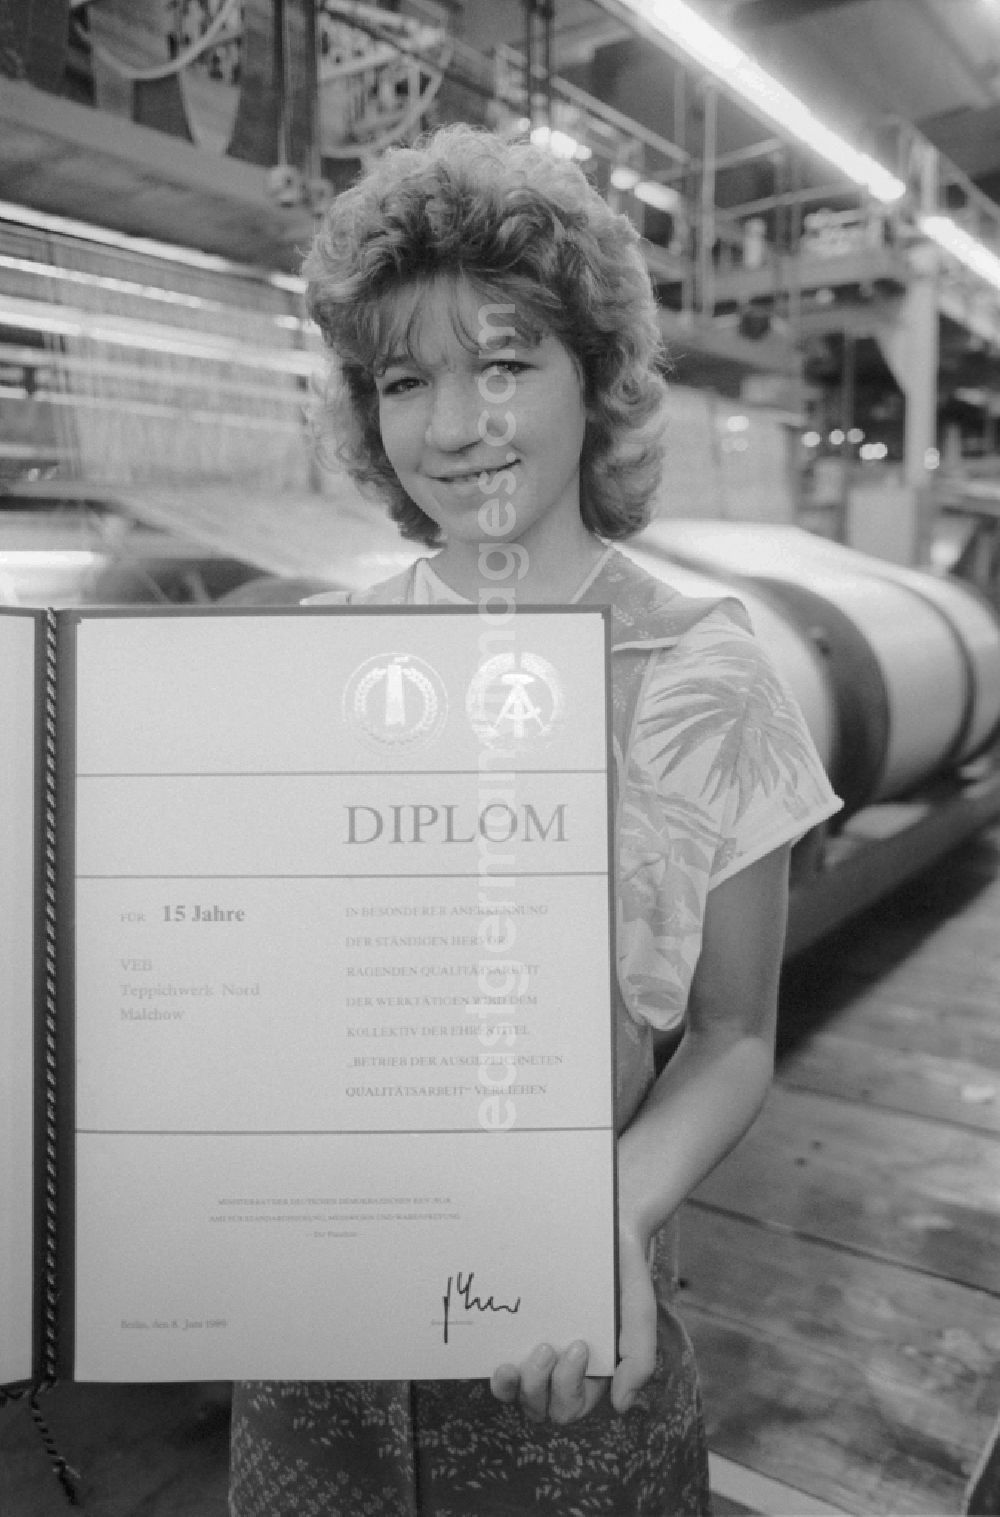 GDR photo archive: Malchow - As the first operation of the textile industry of the GDR received the Carpet Factory North Malchow, district Waren, the Honorary Diploma 15 Years of operation of the excellent quality of work in Malchow in Mecklenburg-Western Pomerania in the field of the former GDR, German Democratic Republic. It maintains a staff in his hand and shows it with pride